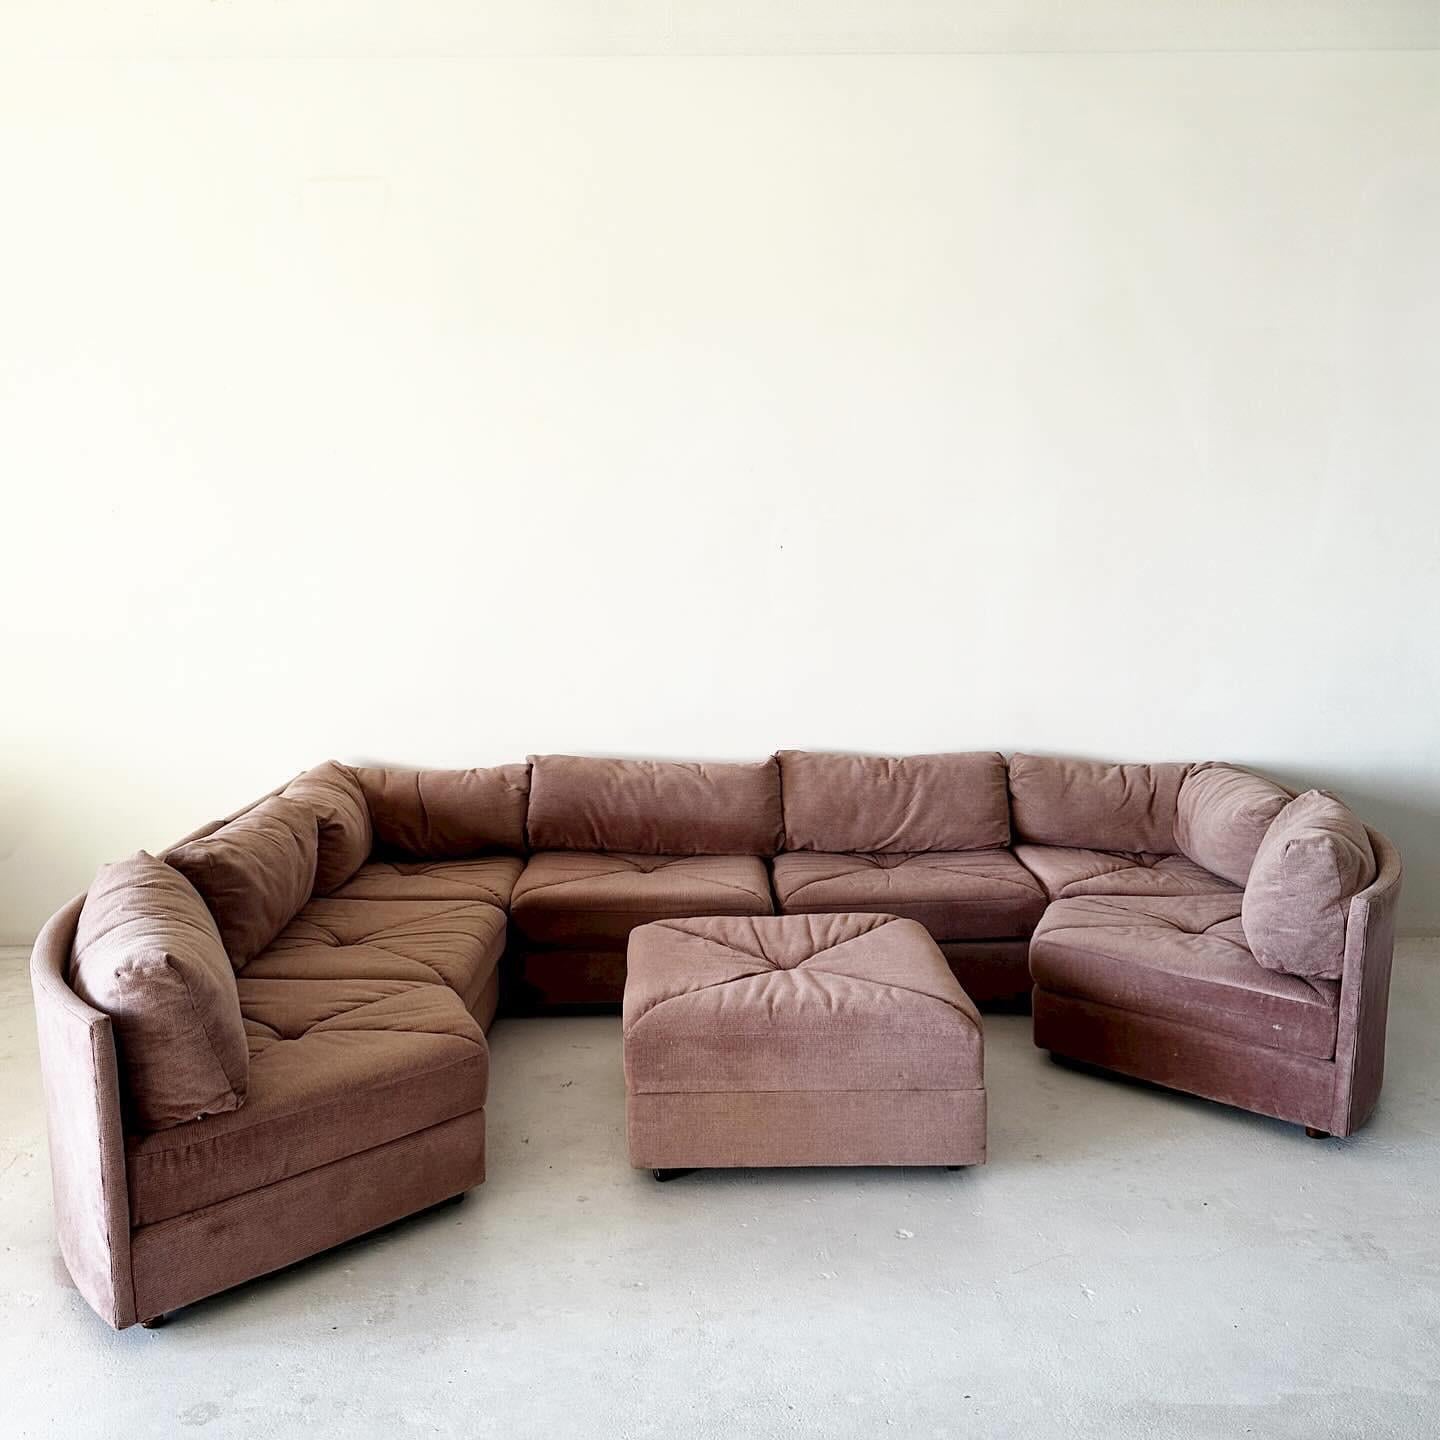 Late 20th Century vintage 8-piece modular sectional with original mauve tweed upholstery